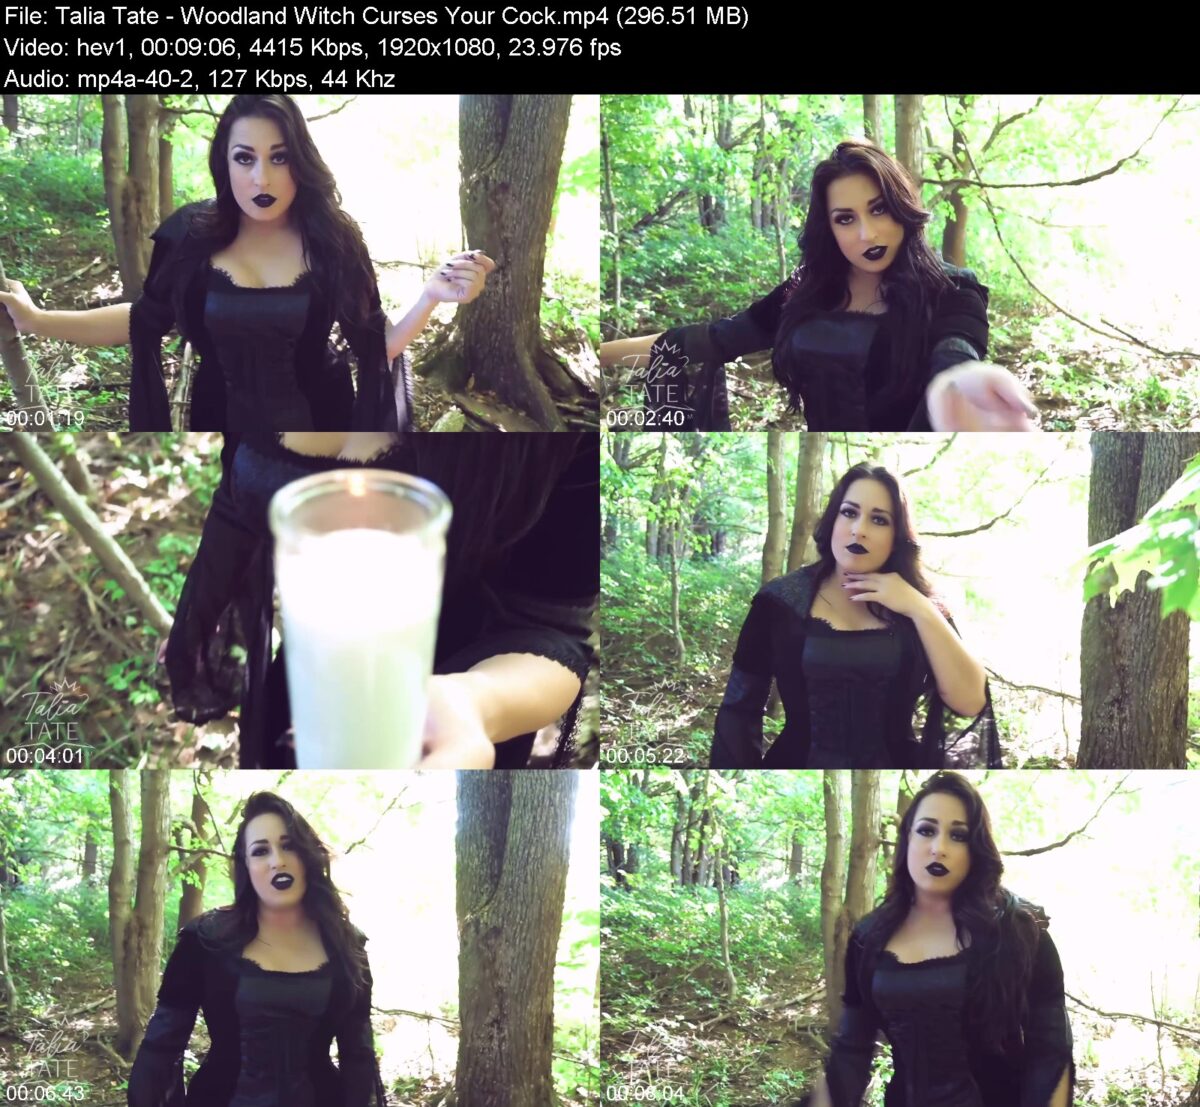 Actress: Talia Tate. Title and Studio: Woodland Witch Curses Your Cock